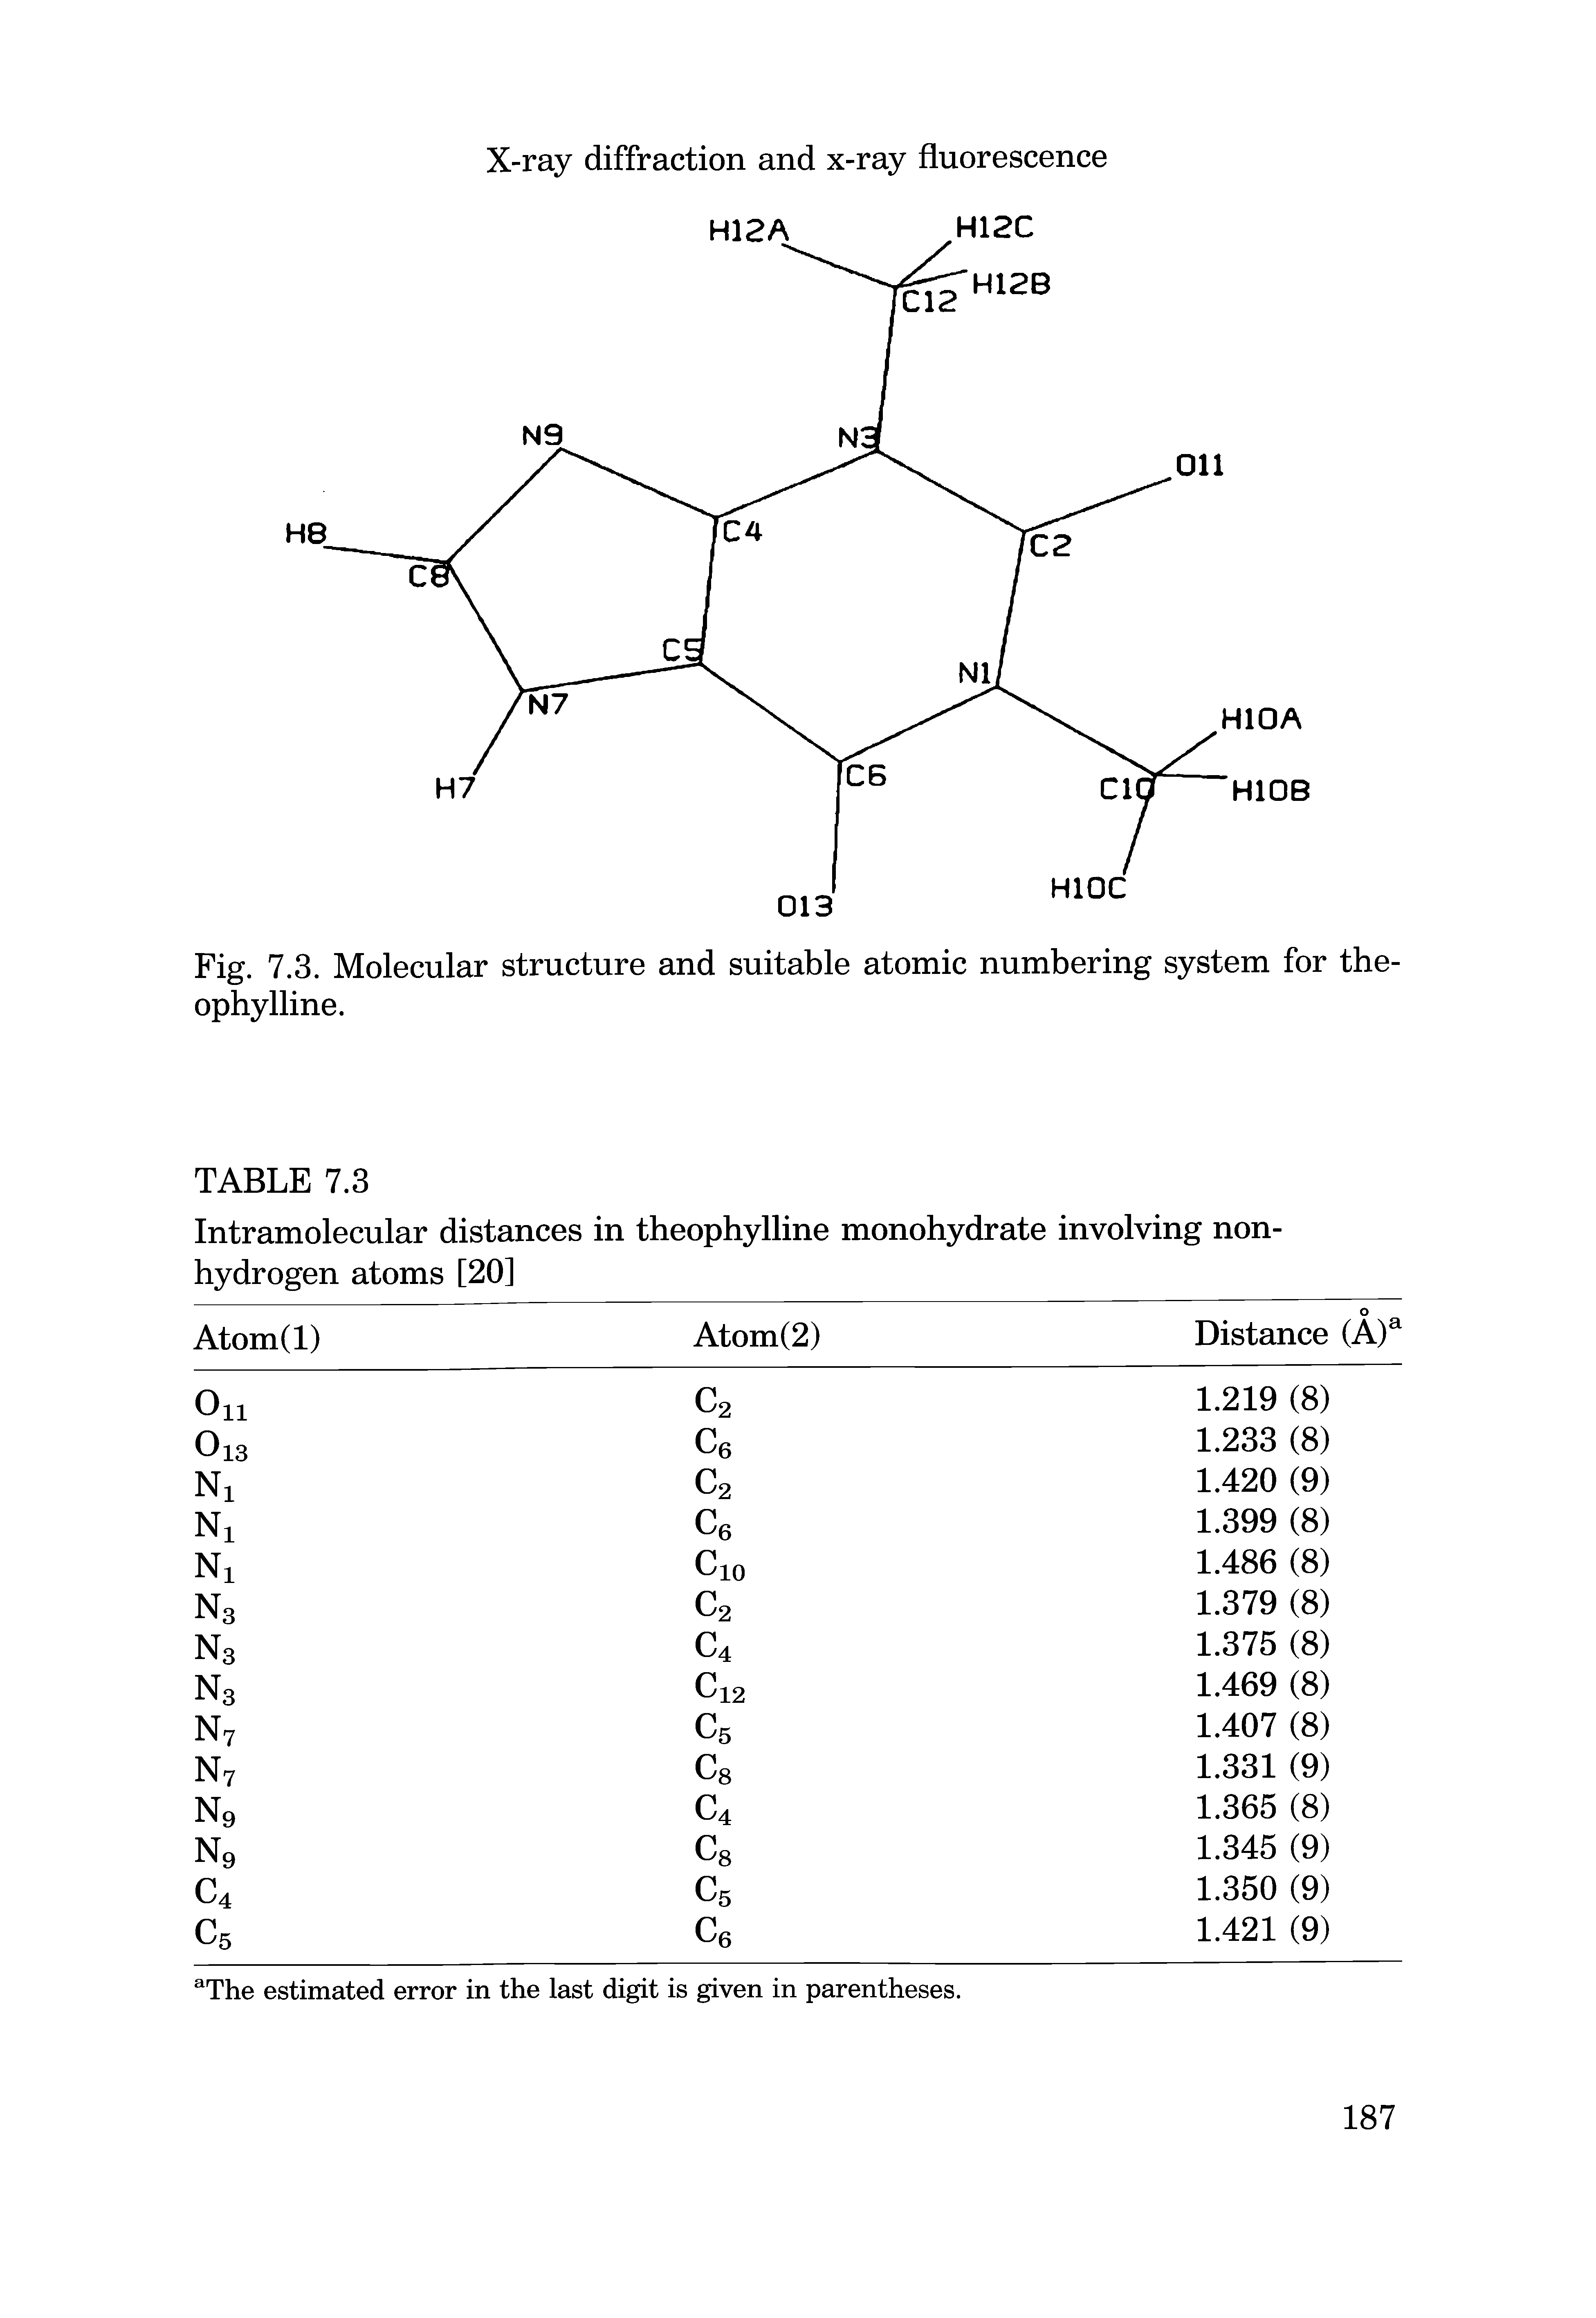 Fig. 7.3. Molecular structure and suitable atomic numbering system for theophylline.